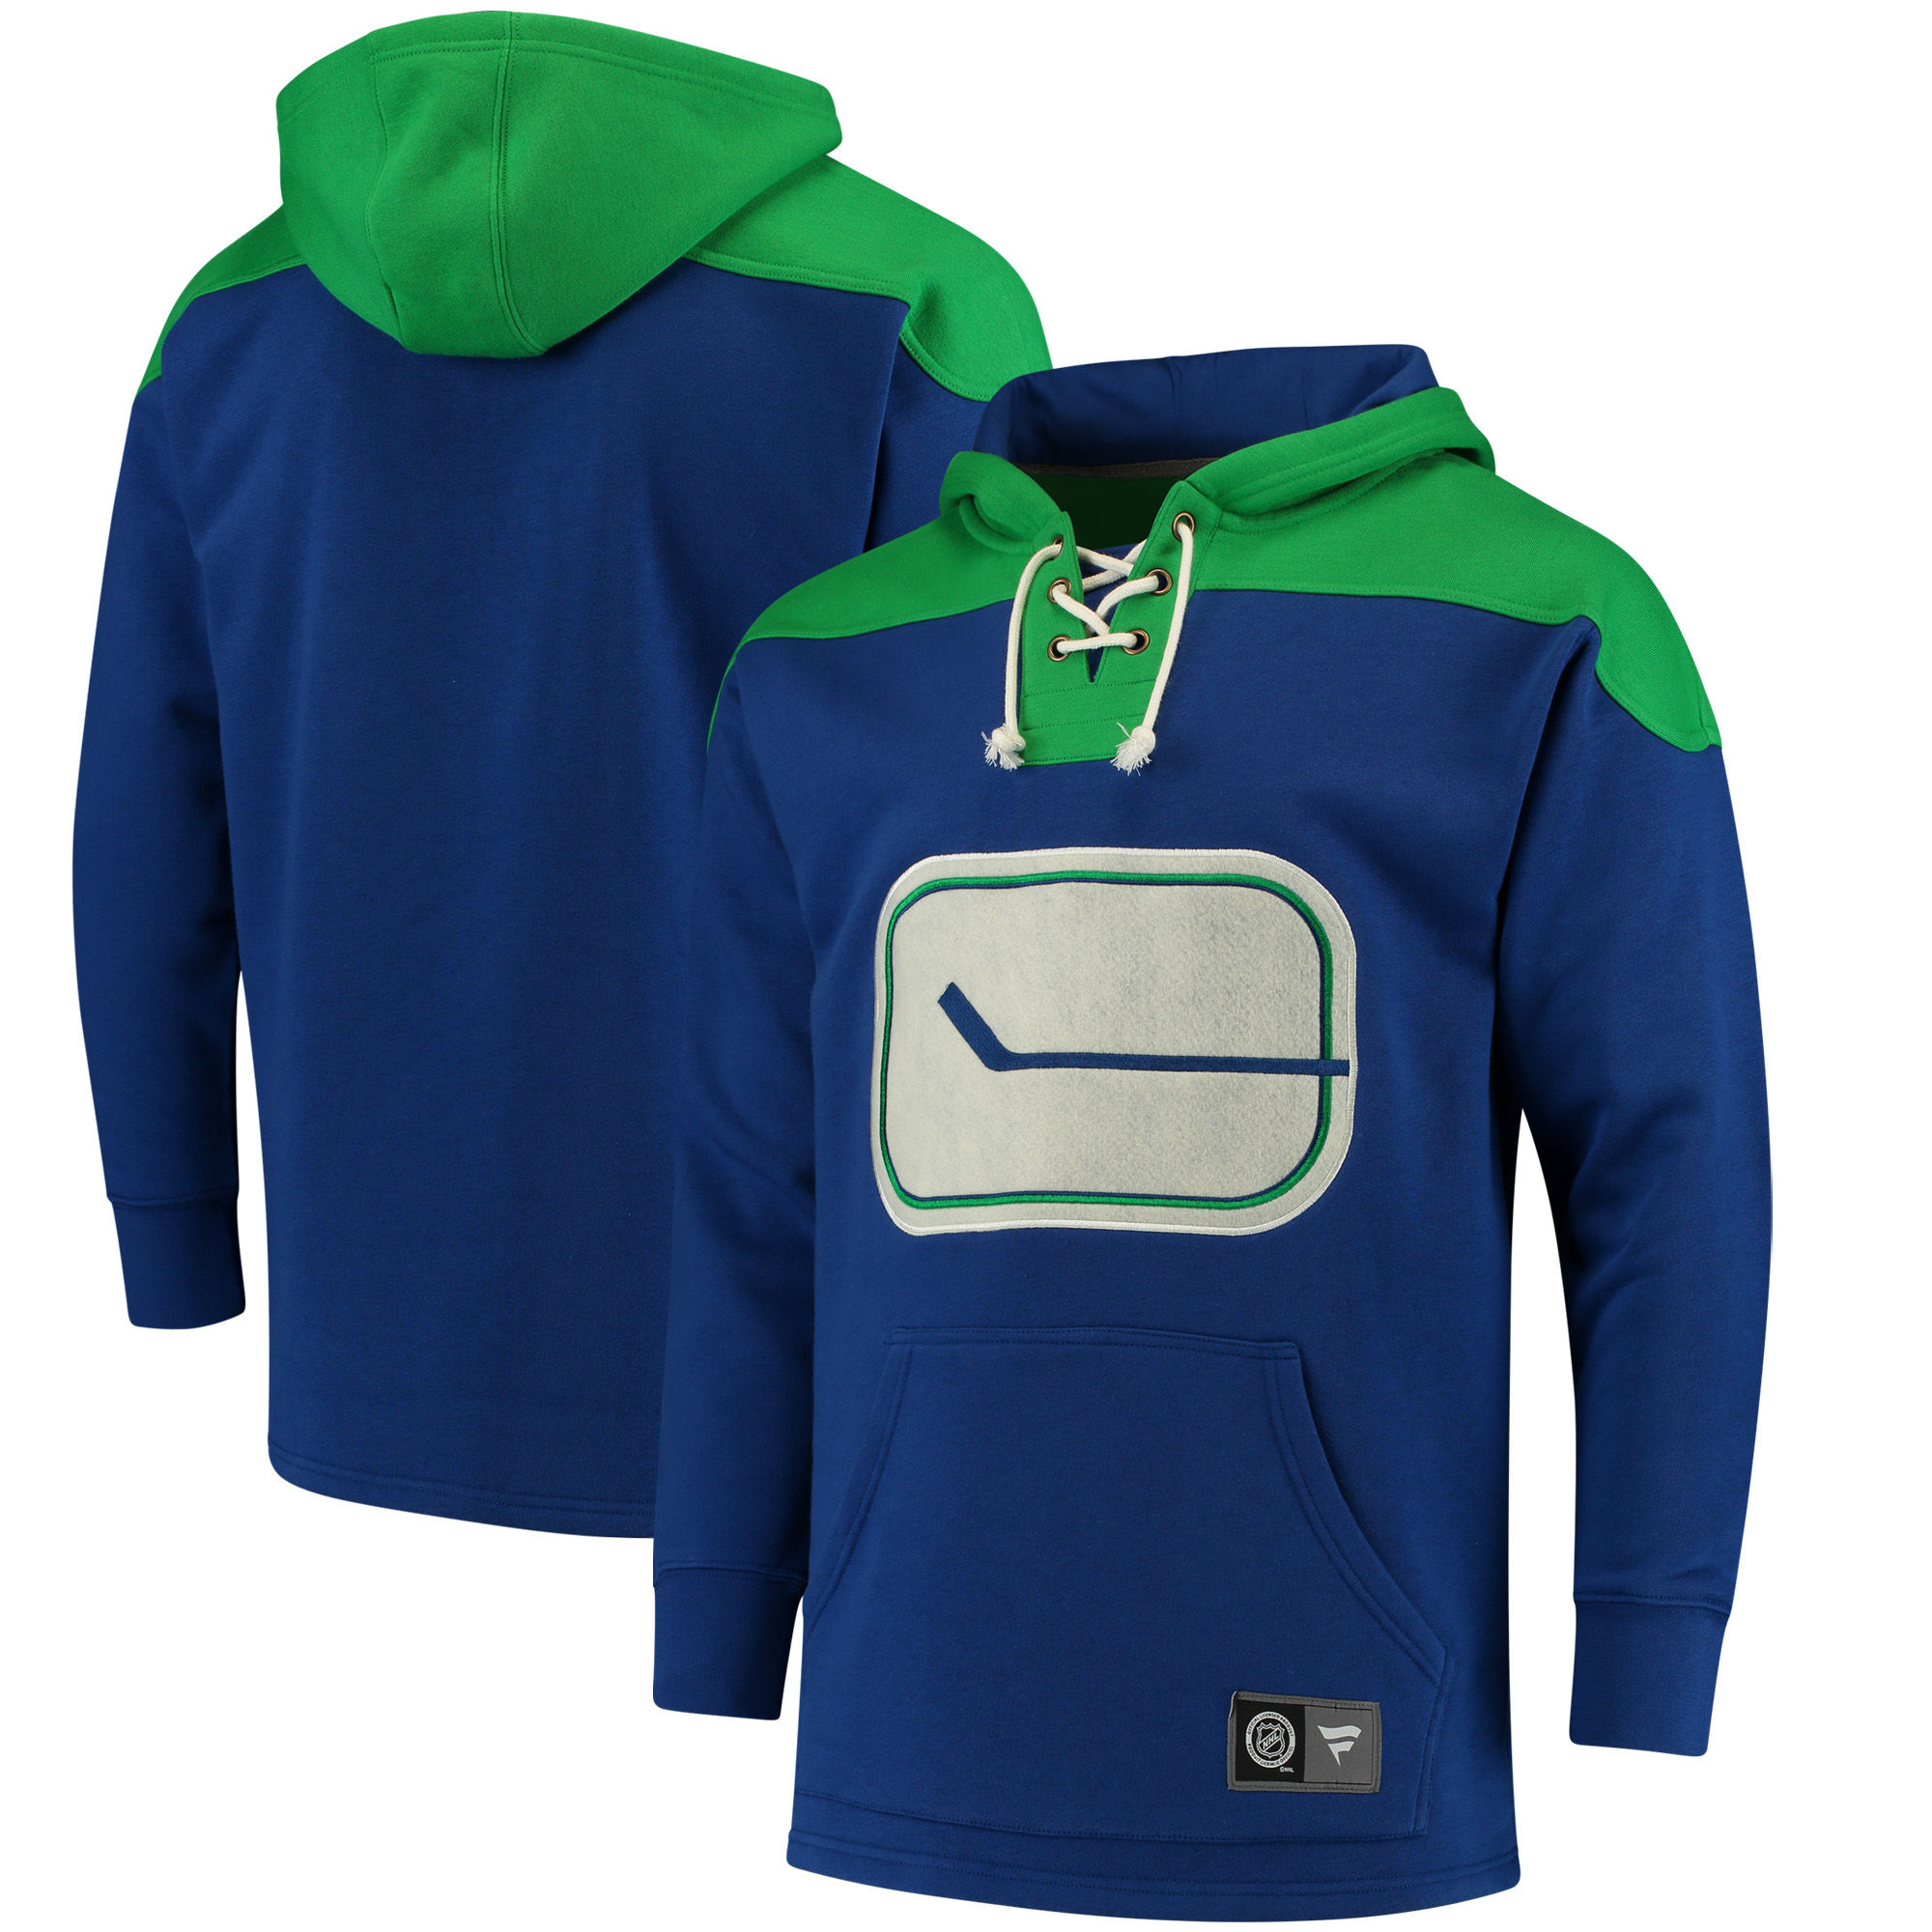 Men's Vancouver Canucks Fanatics Branded Royal/Green Breakaway Lace Up Hoodie